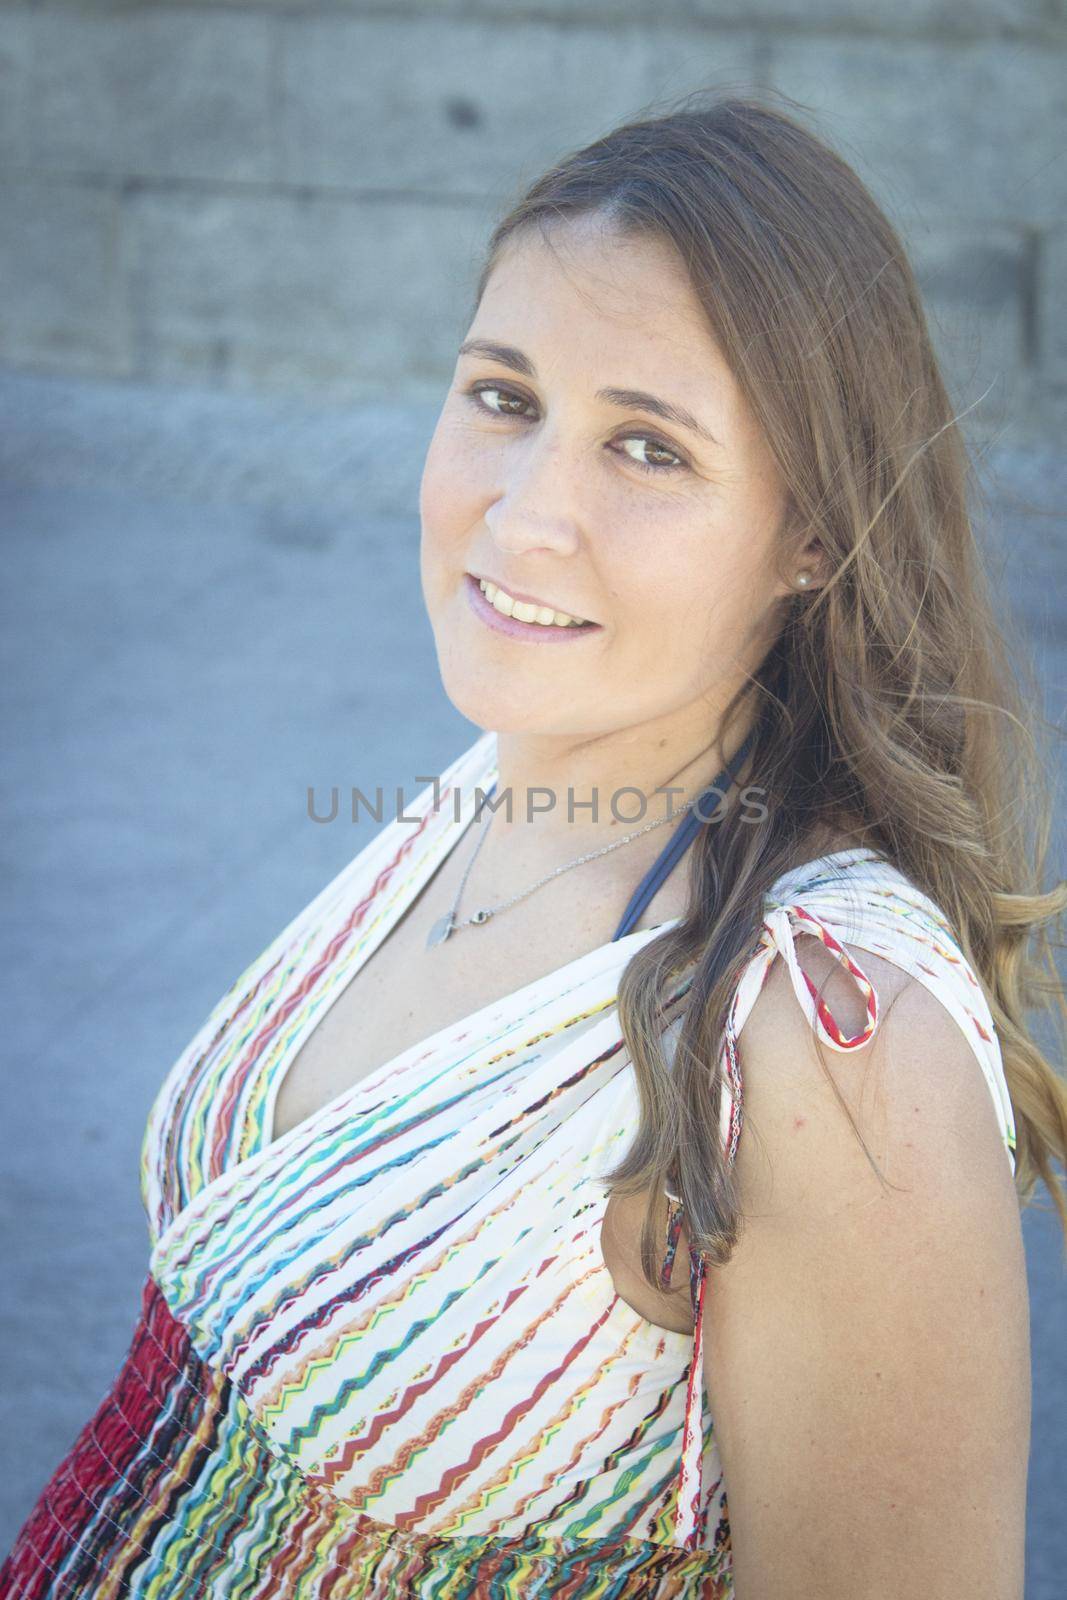 Seven month pregnant woman outdoors in multi colored striped dress by GemaIbarra